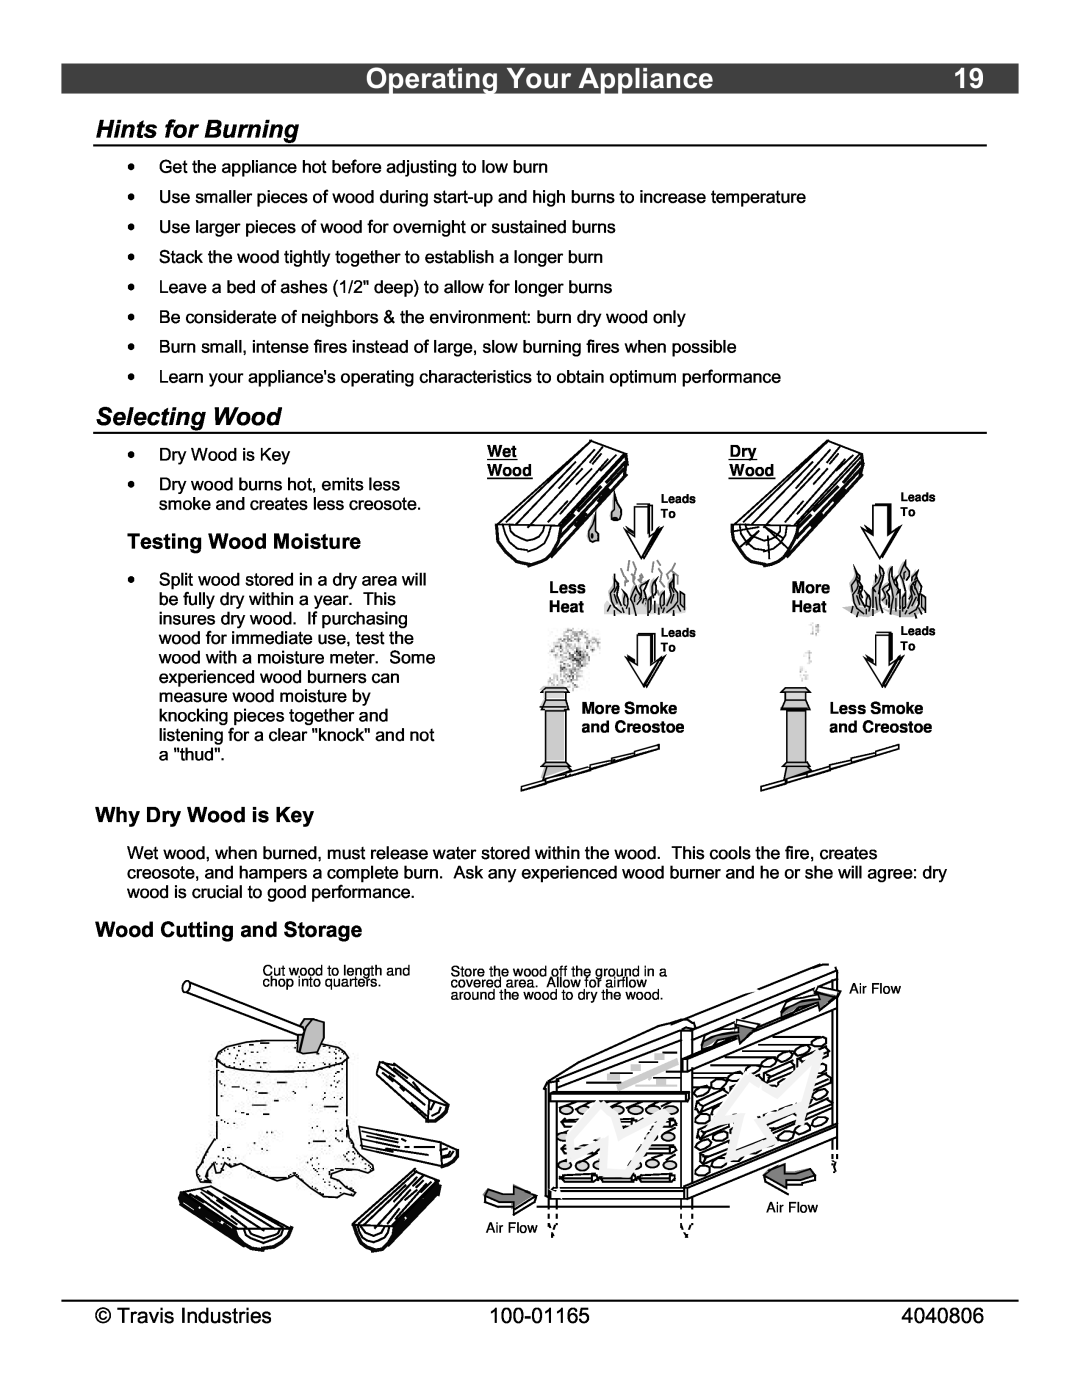 Lopi Revere owner manual Operating Your Appliance, Hints for Burning, Selecting Wood, Travis Industries, 100-01165, 4040806 